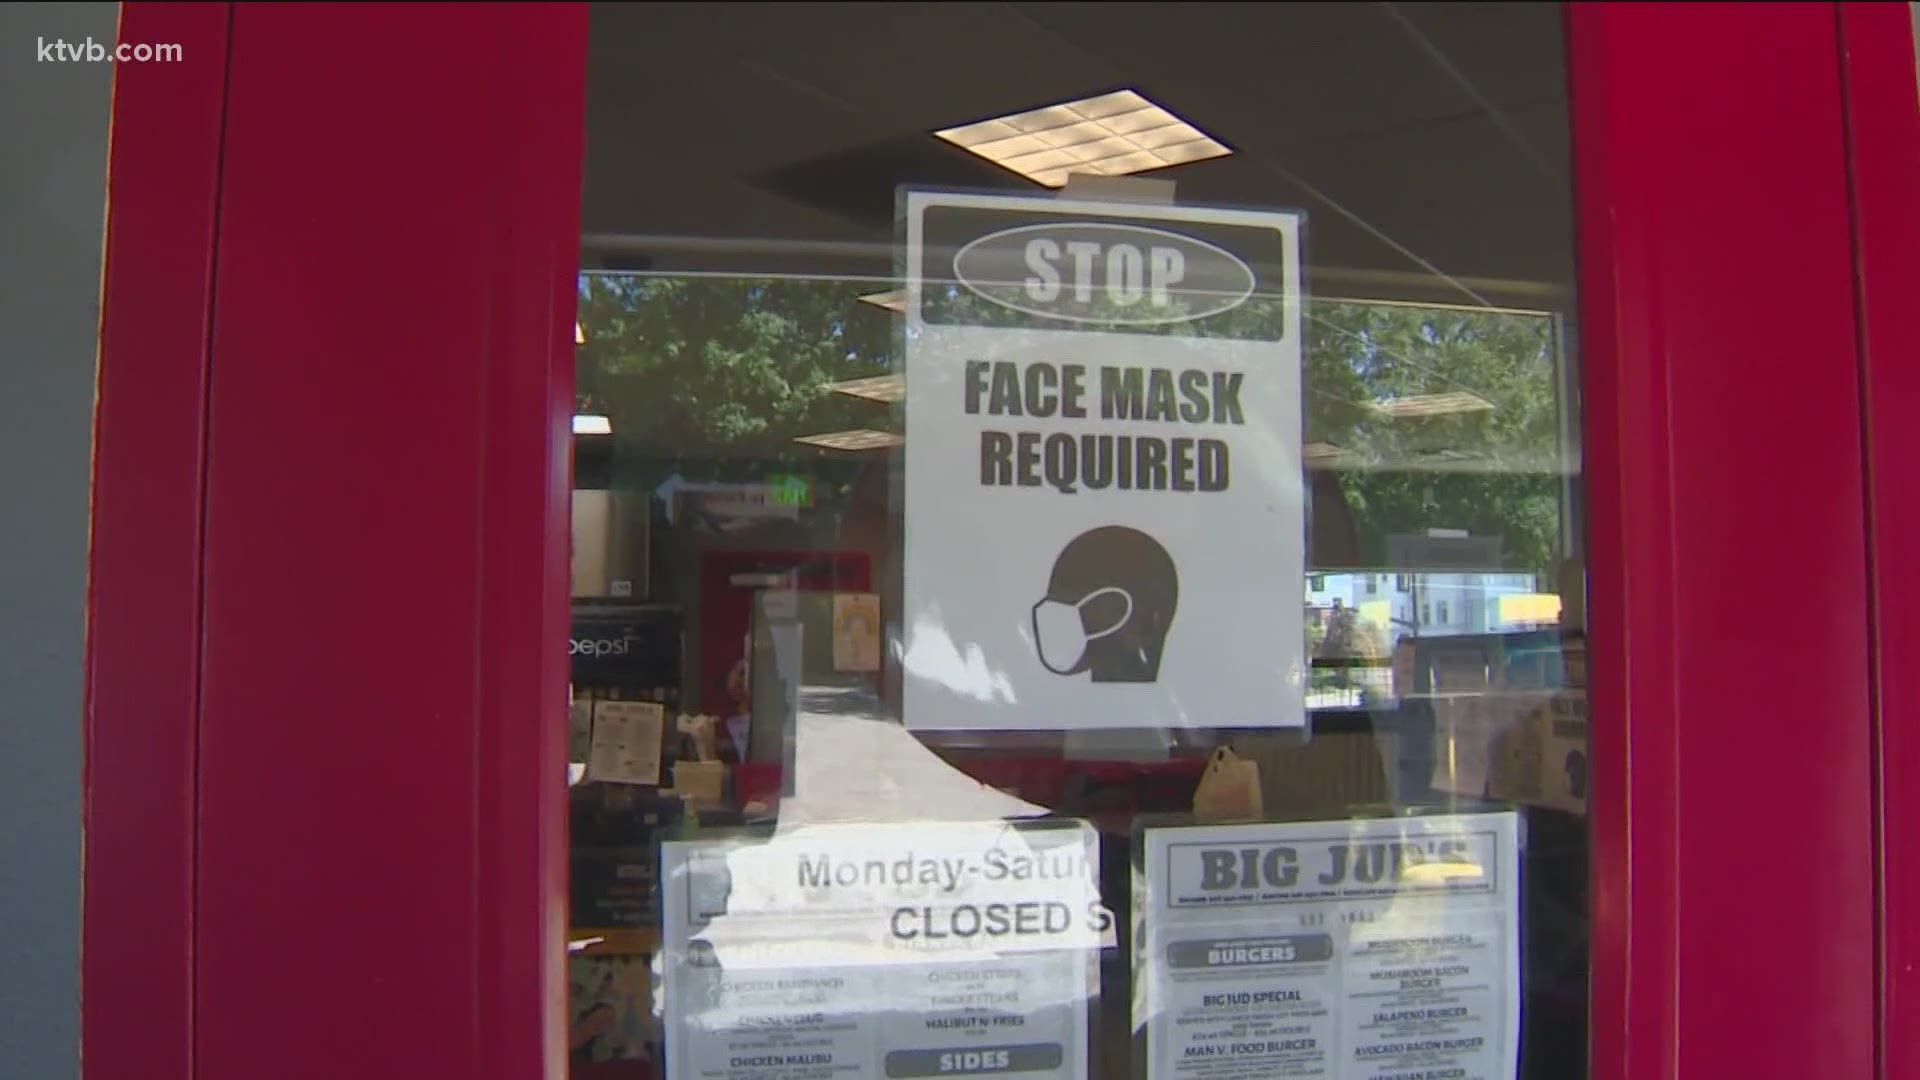 The city of Boise lifted indoor mask policies Friday, but local businesses still have the option of whether or not to require face coverings in their stores.